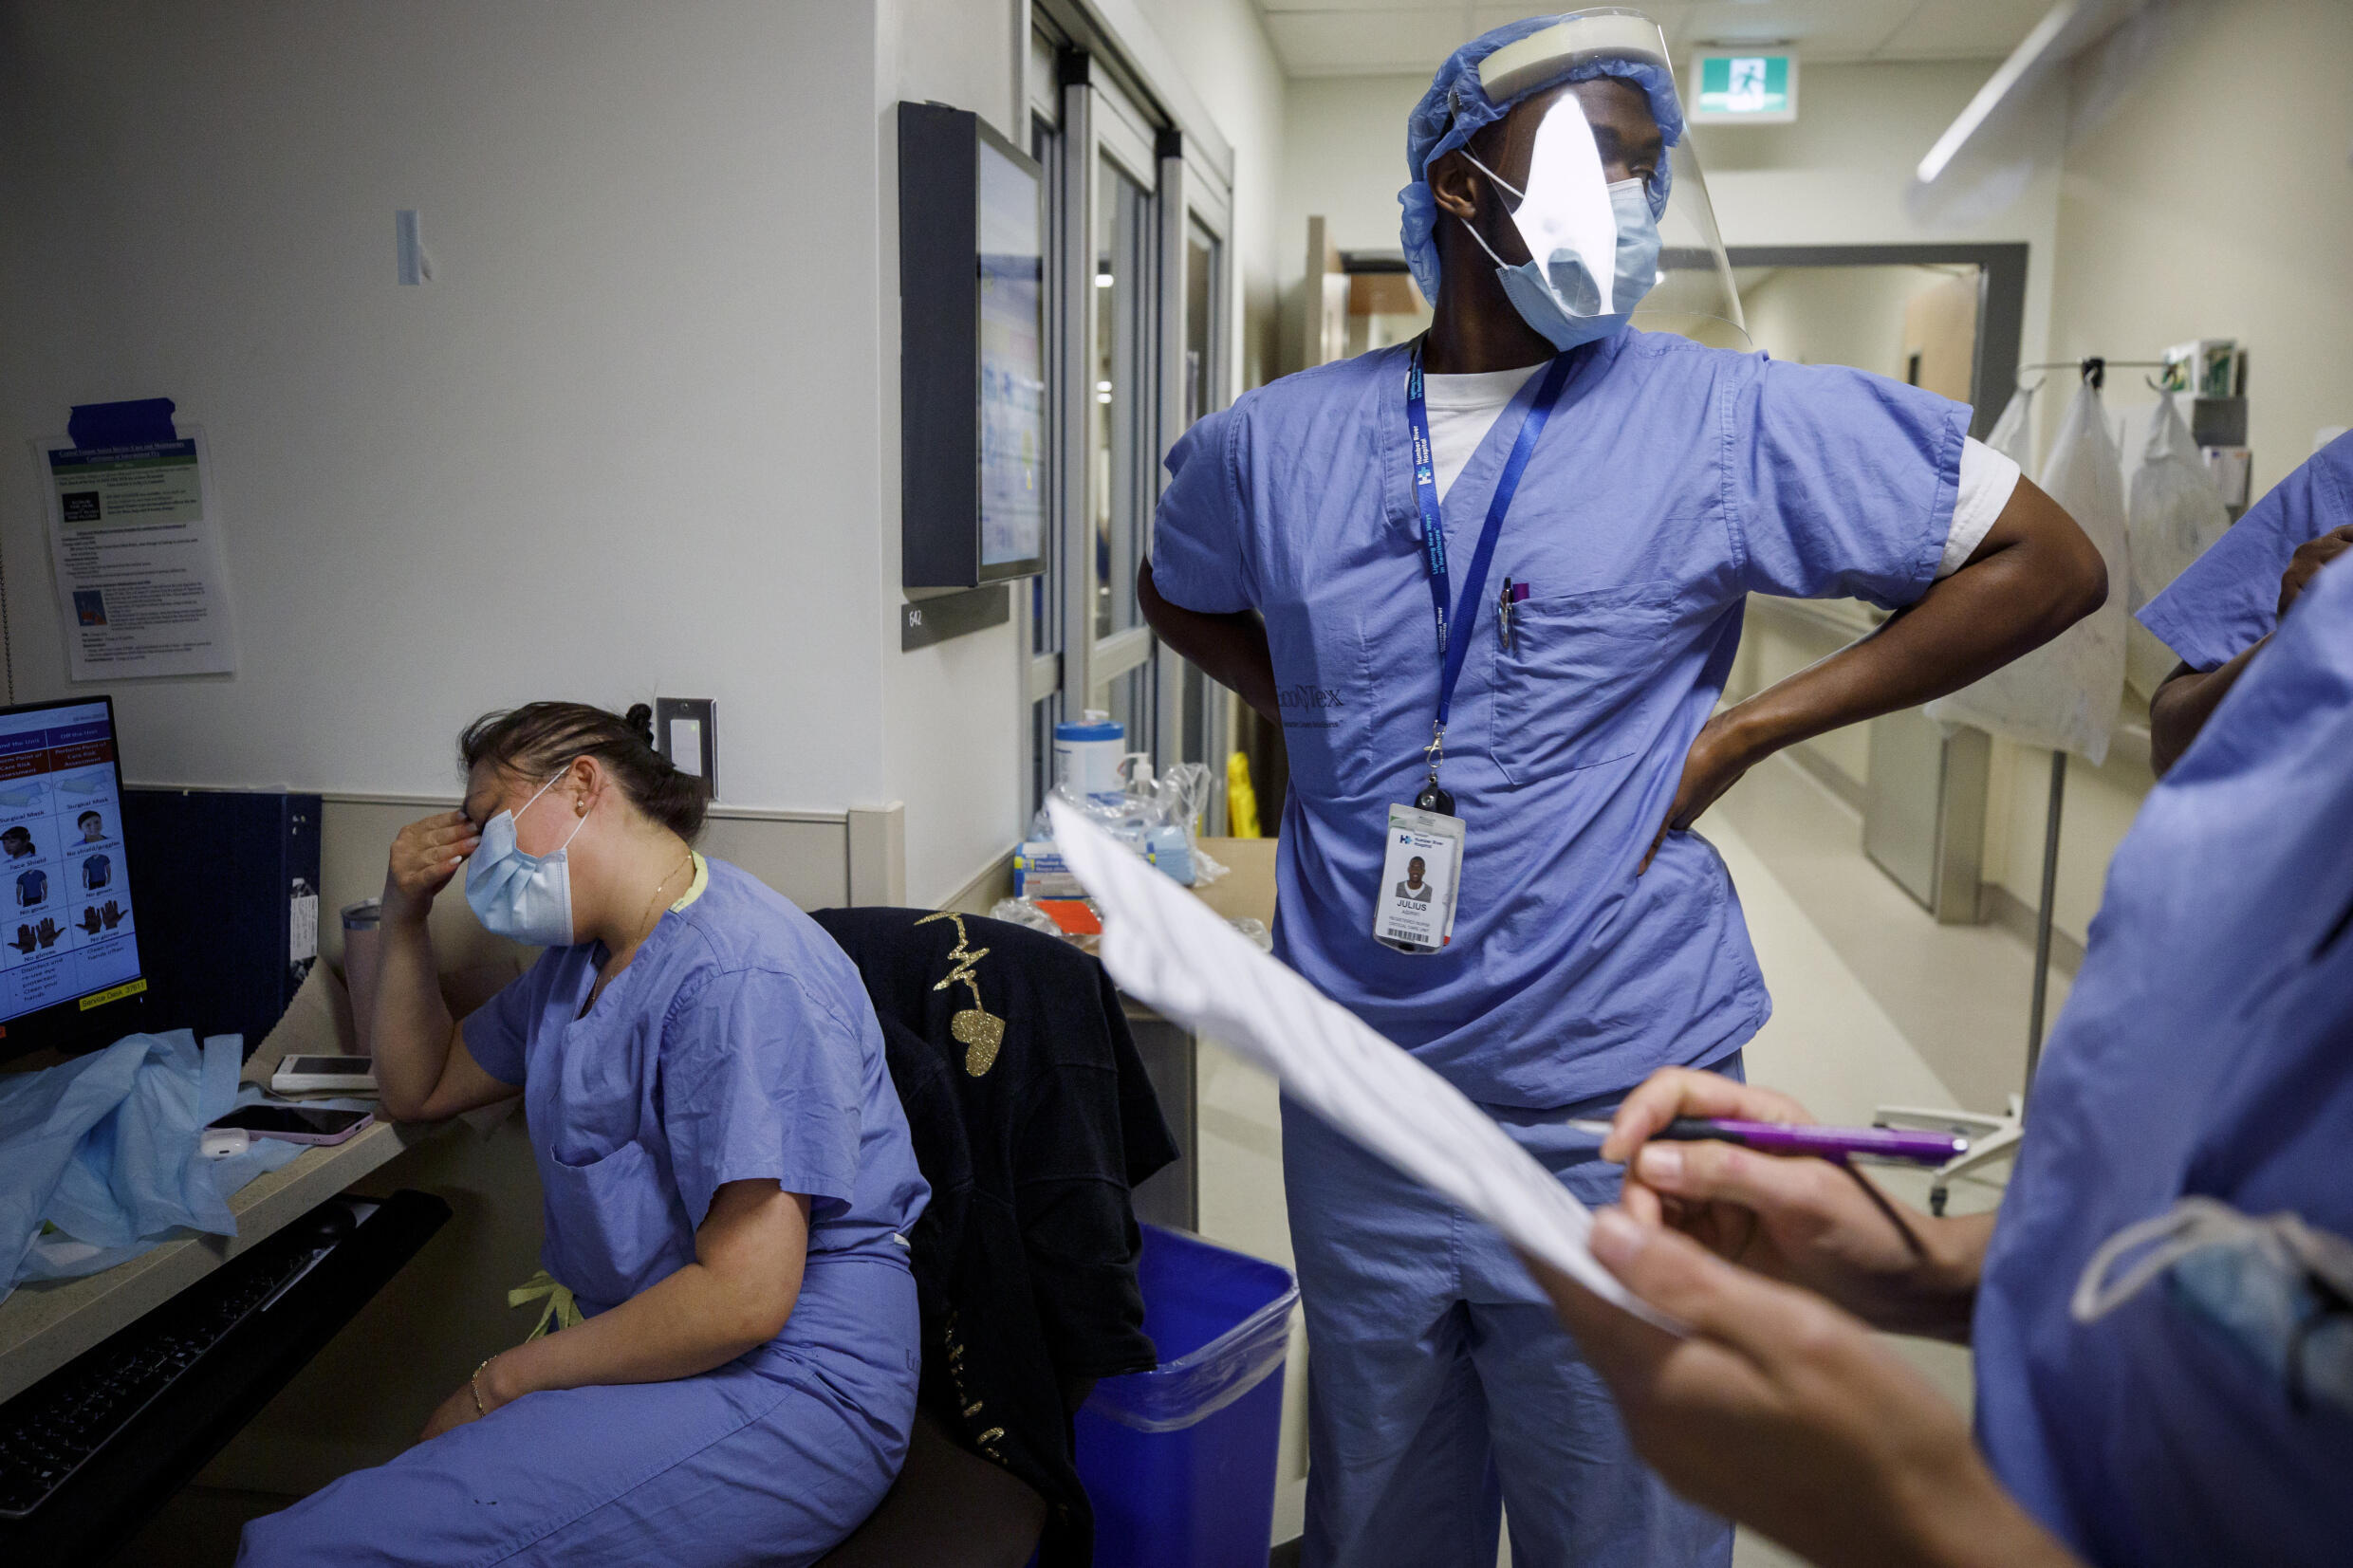 A tired nurse holds her head after a long shift at Toronto's Humber River Hospital in April 2021; workloads have become heavier since then, prompting a health care crisis. Cole Burston AFP/File